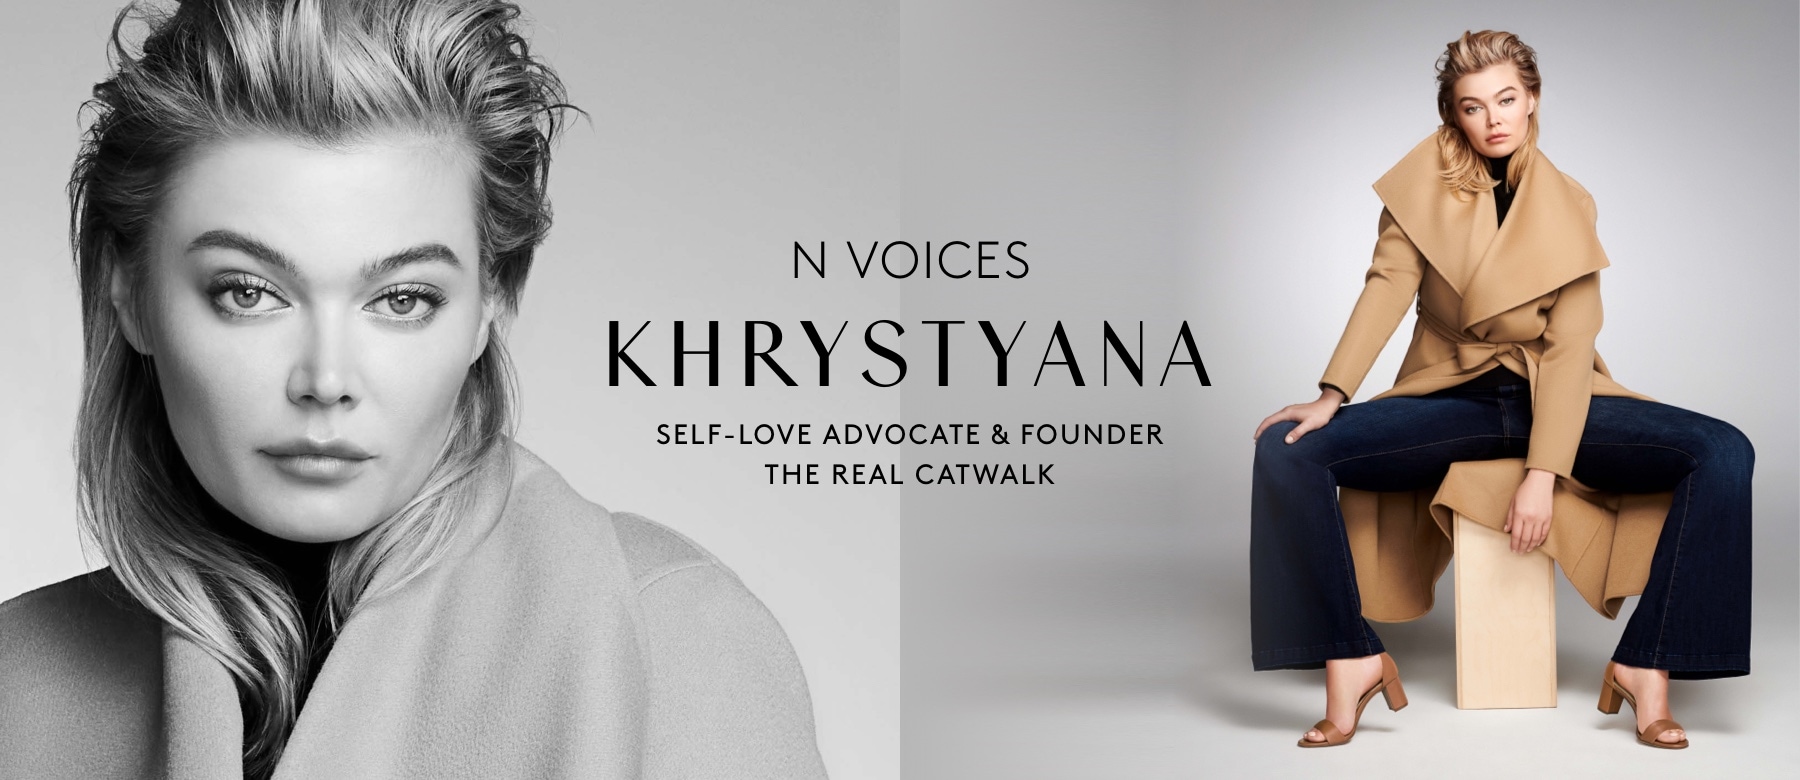 Khrystyana N voices